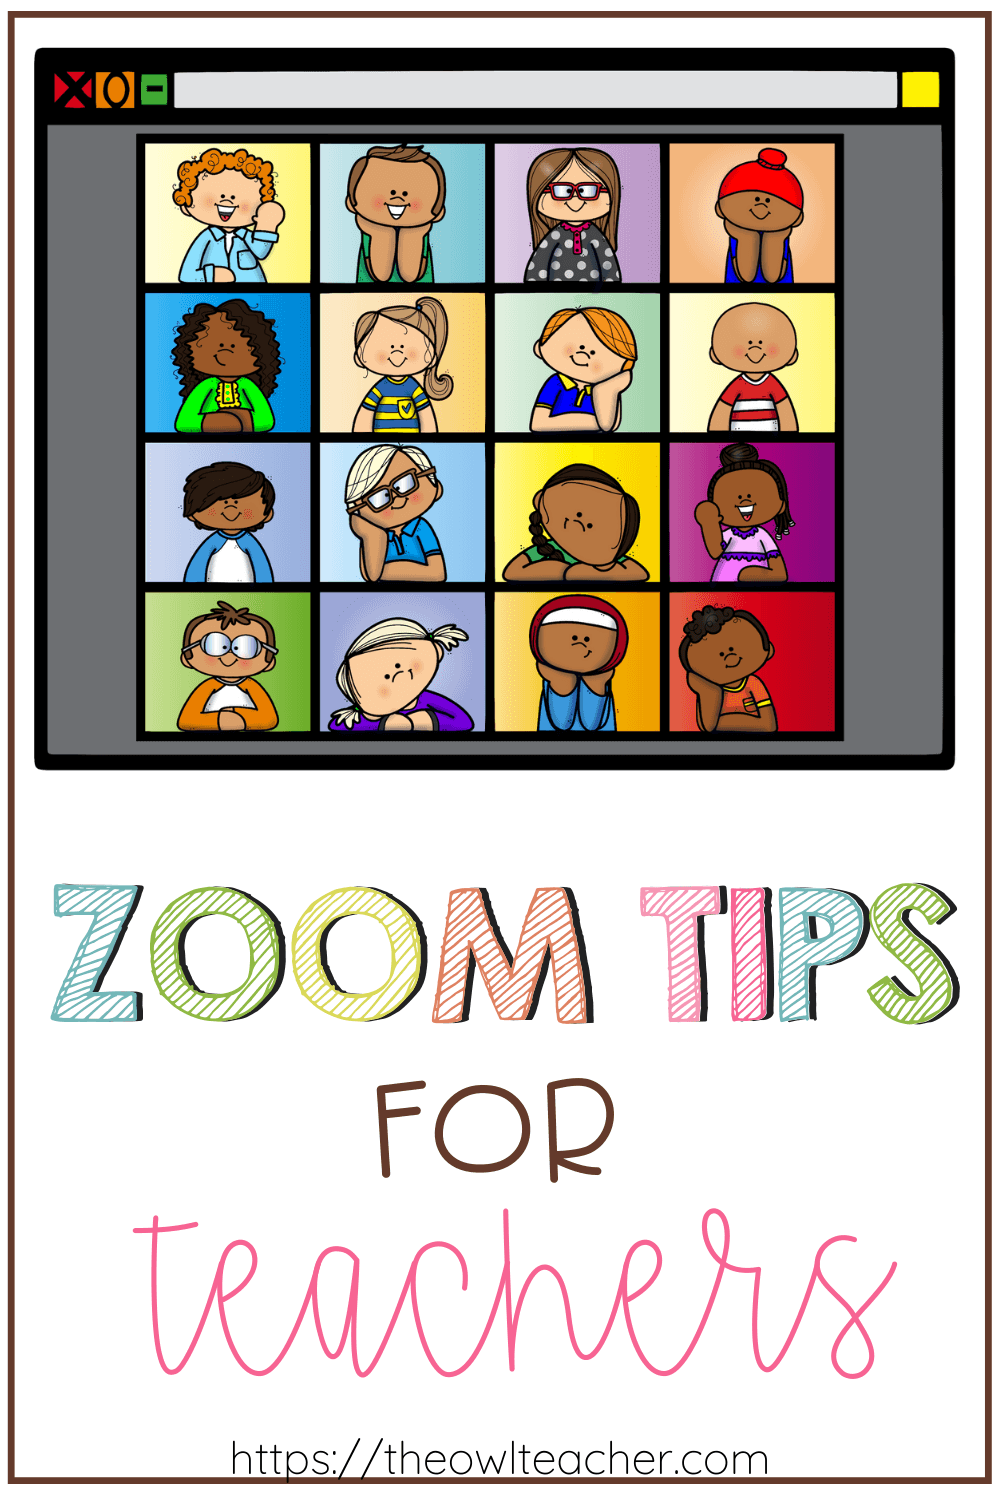 There's a pretty good chance that you'll be using Zoom for class meetings or staff meetings this upcoming school year whether you are distance teaching or using a hybrid approach. Check out this post to learn Zoom tips for teachers and get started right away! via @deshawtammygmail.com